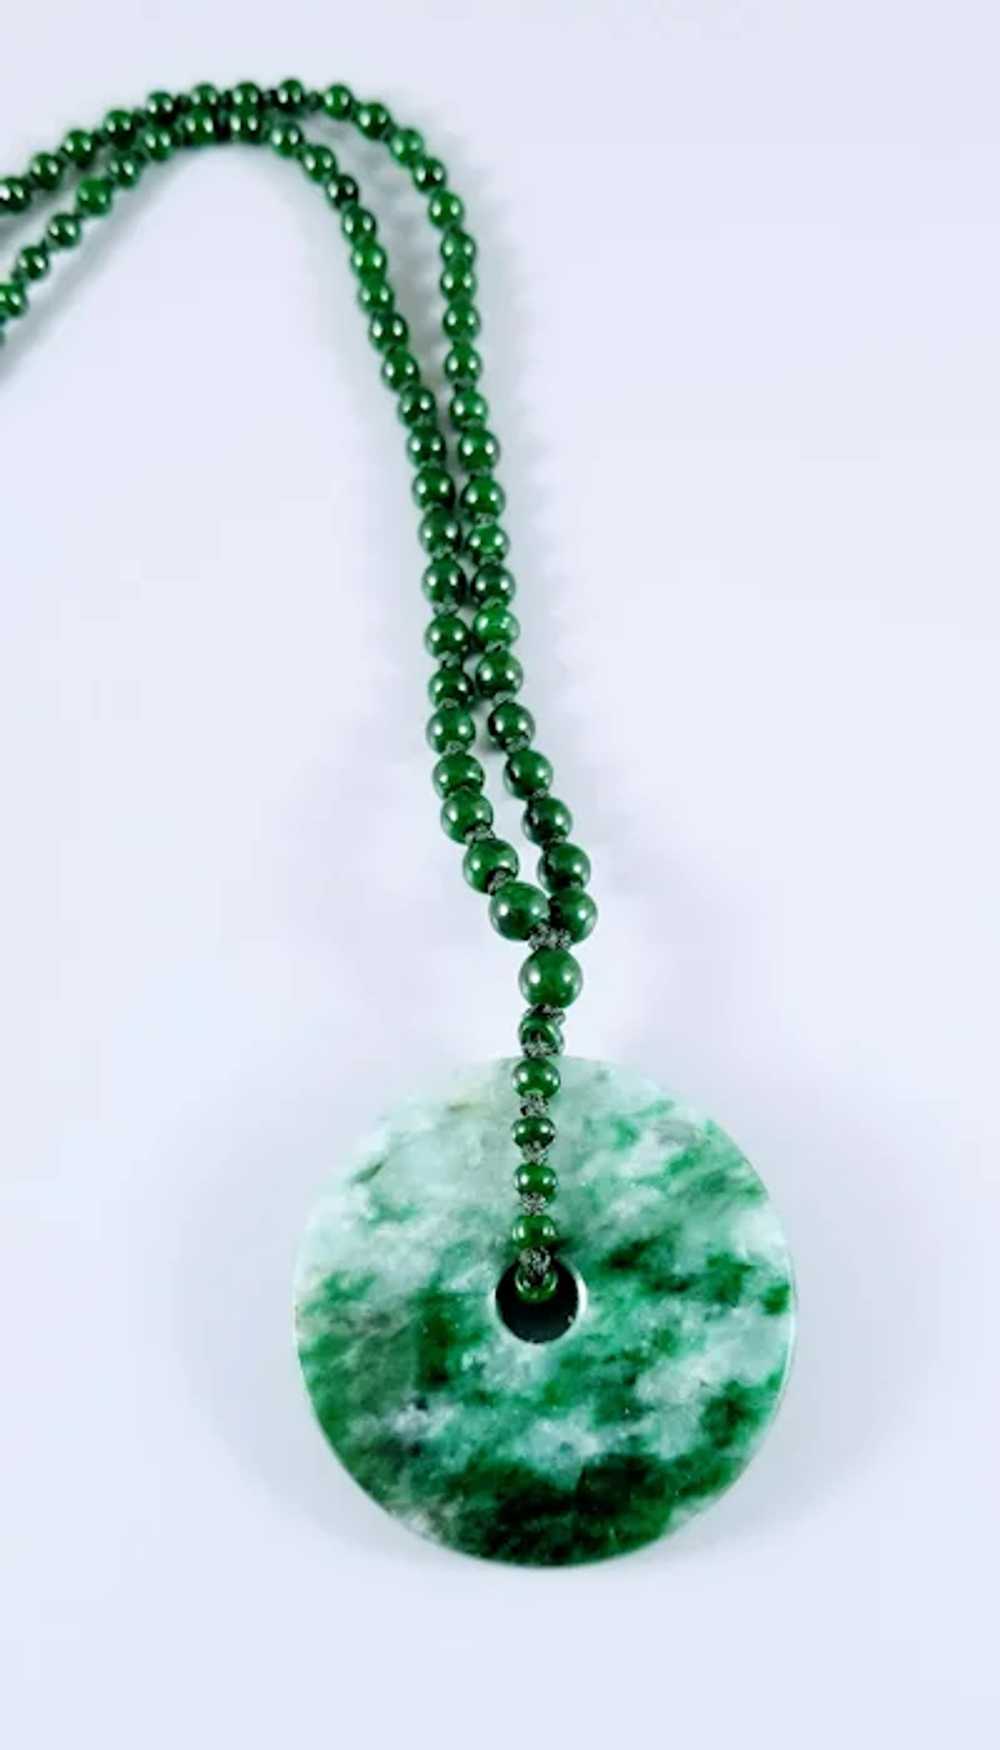 14K Jadeite Pendant and Beads Necklace - image 3